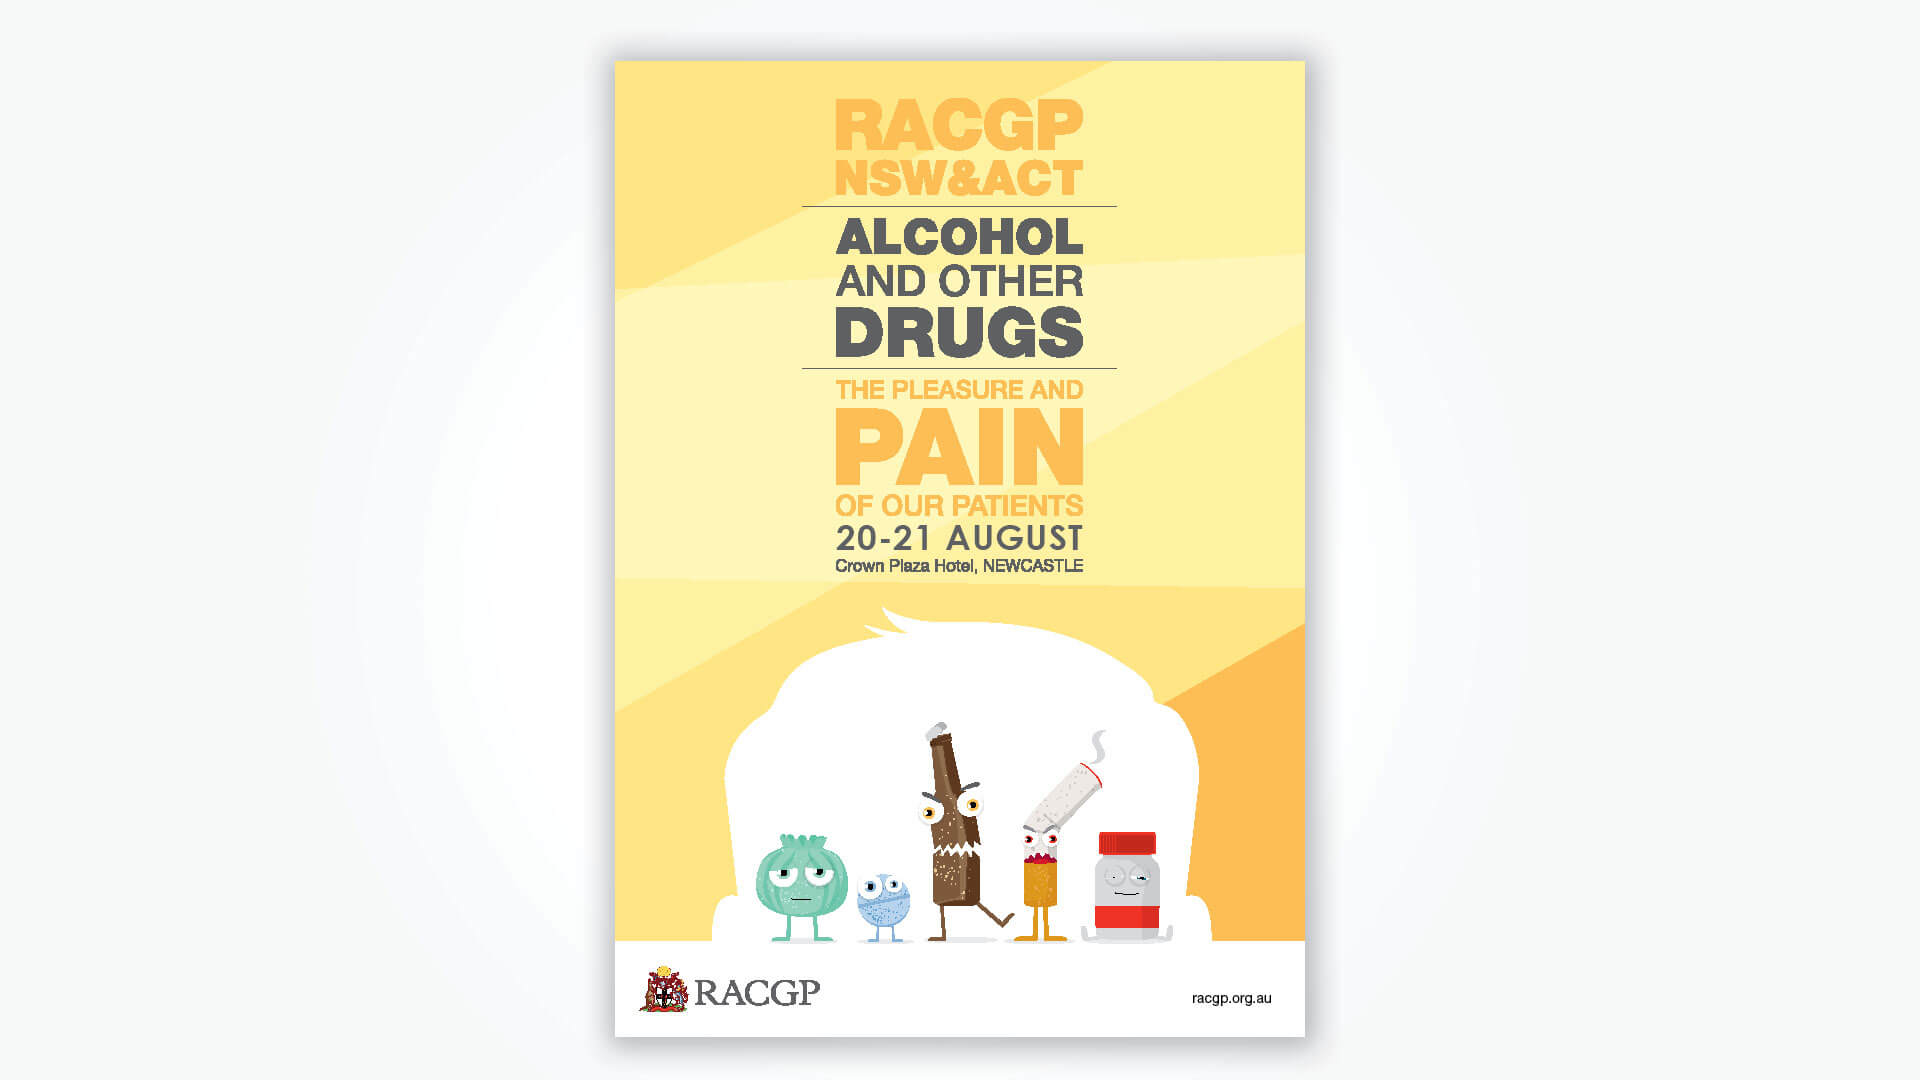 RACGP Campaign Development by Think Creative Agency